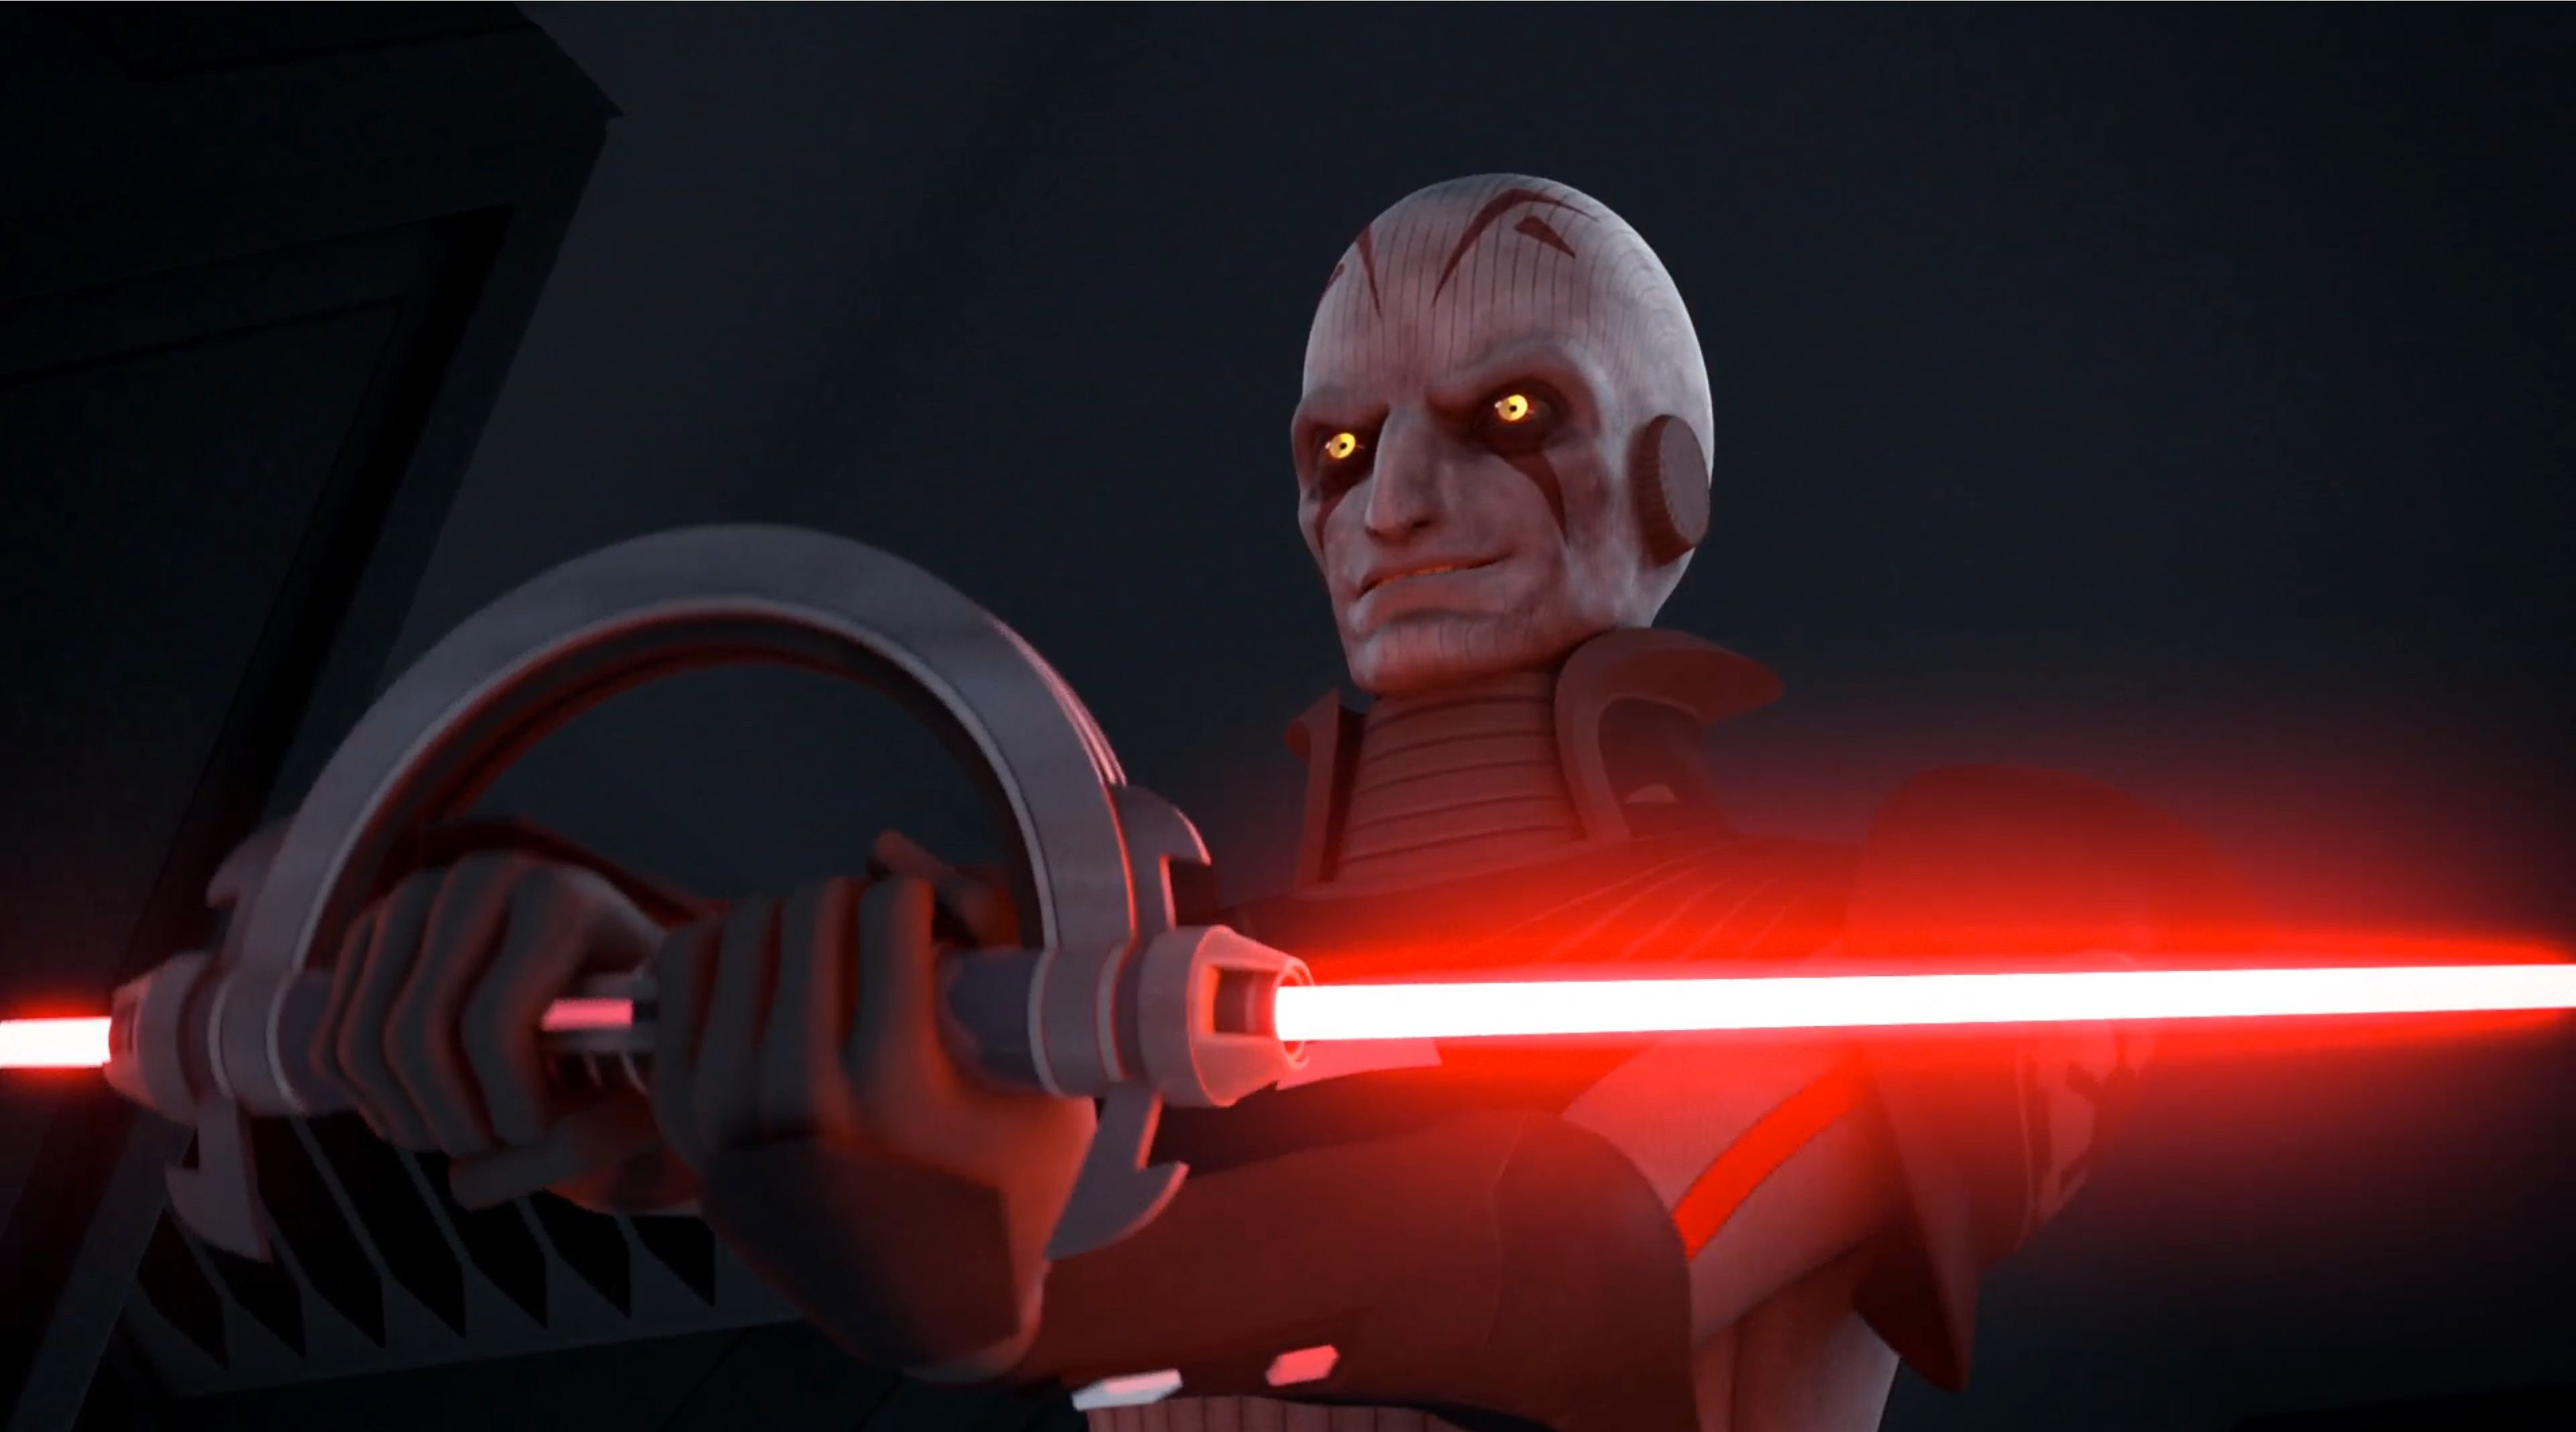 Jason Isaacs' Inquisitor in Star Wars Rebels